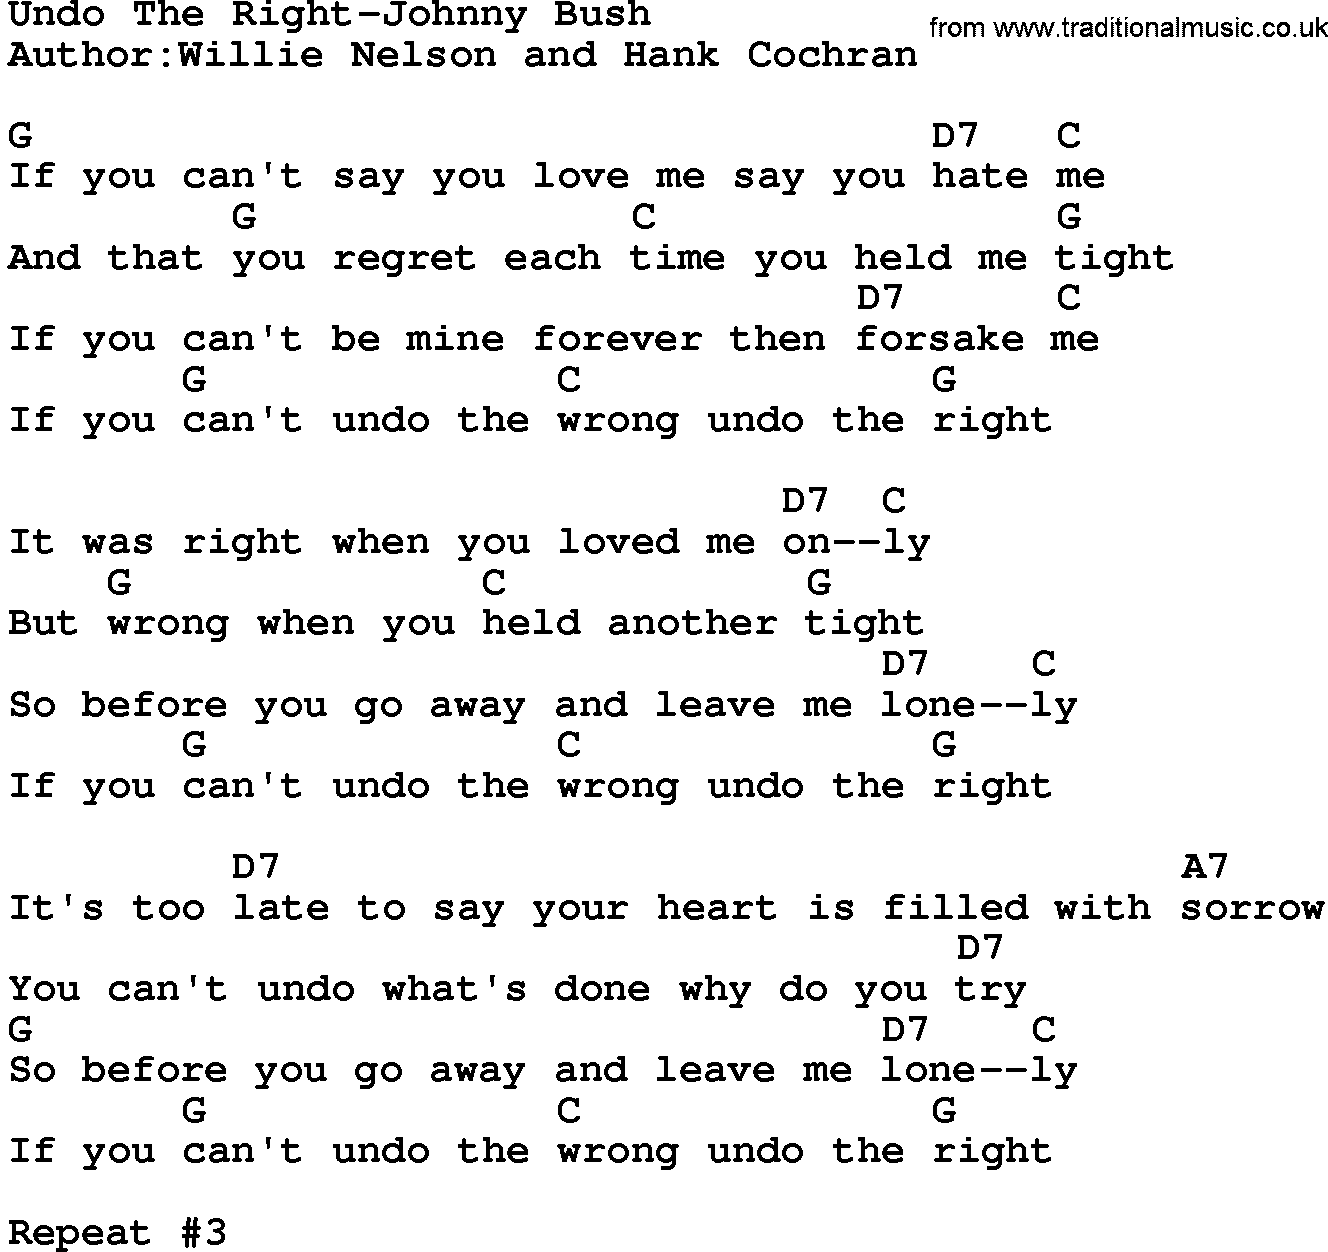 Country music song: Undo The Right-Johnny Bush lyrics and chords